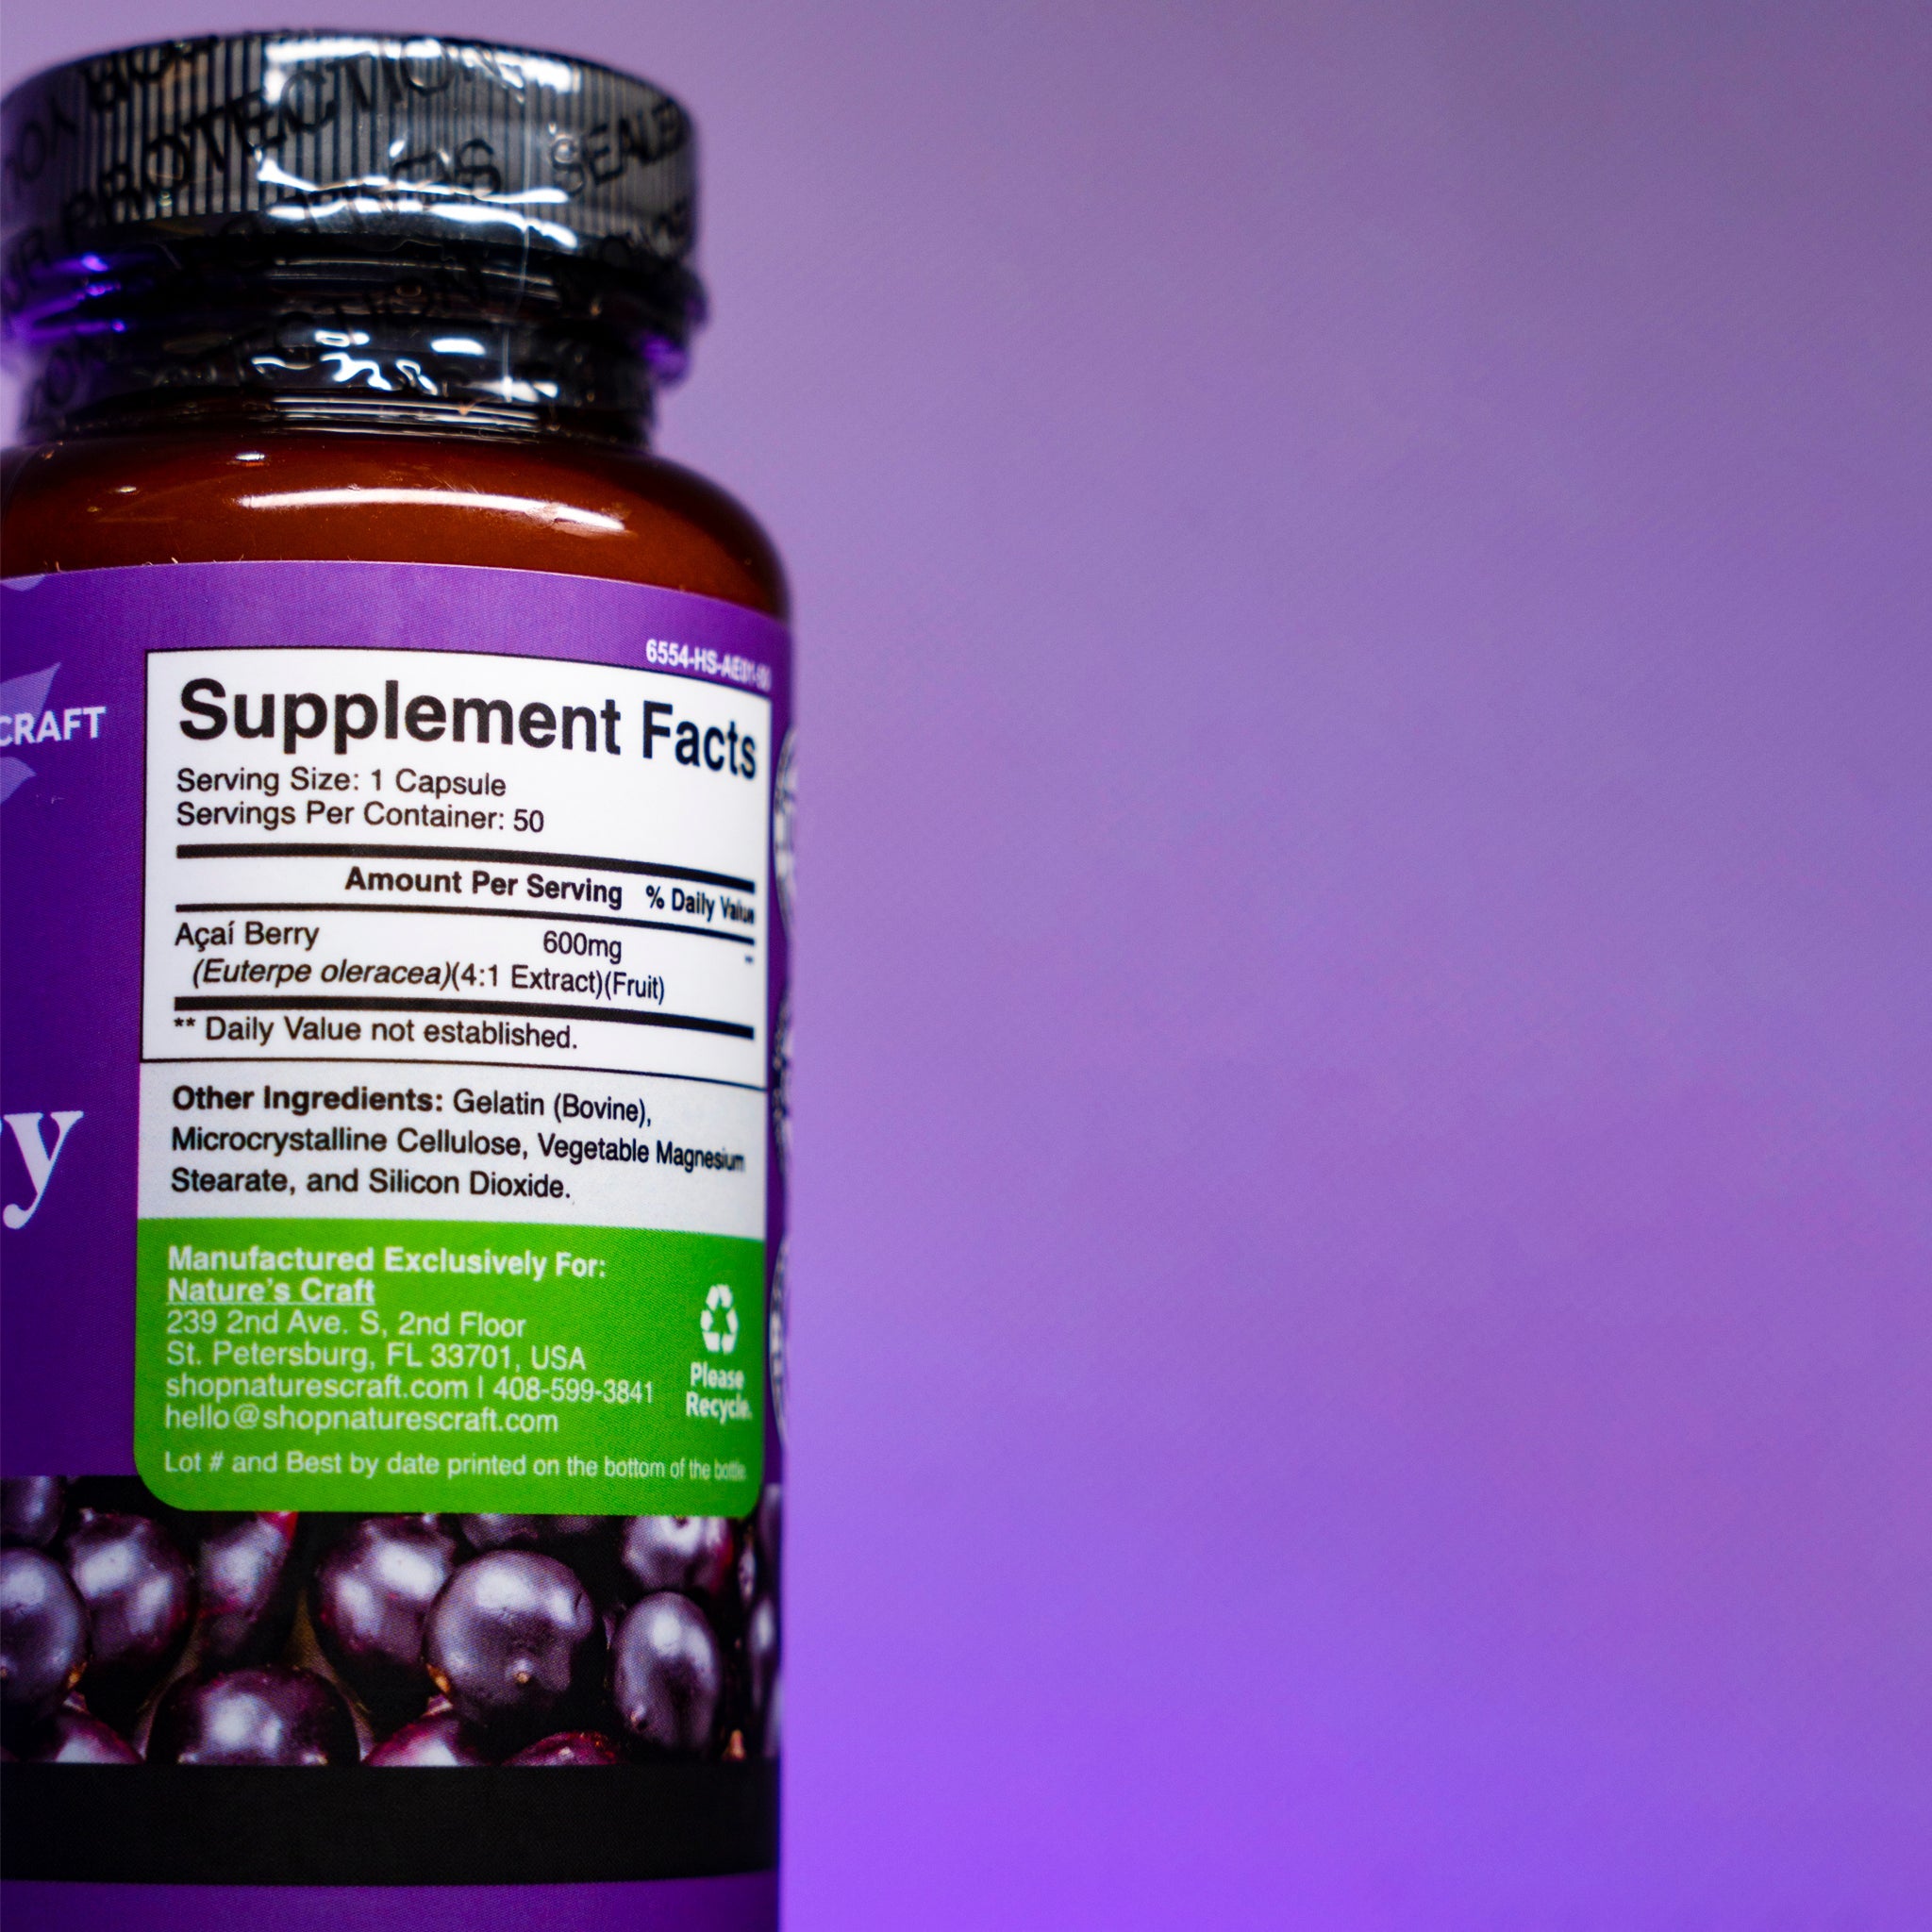 CLEARANCE Acai Berry with Antioxidant | For heart support, energy boost & digestive health - Natures Craft EXP: AUG 2024